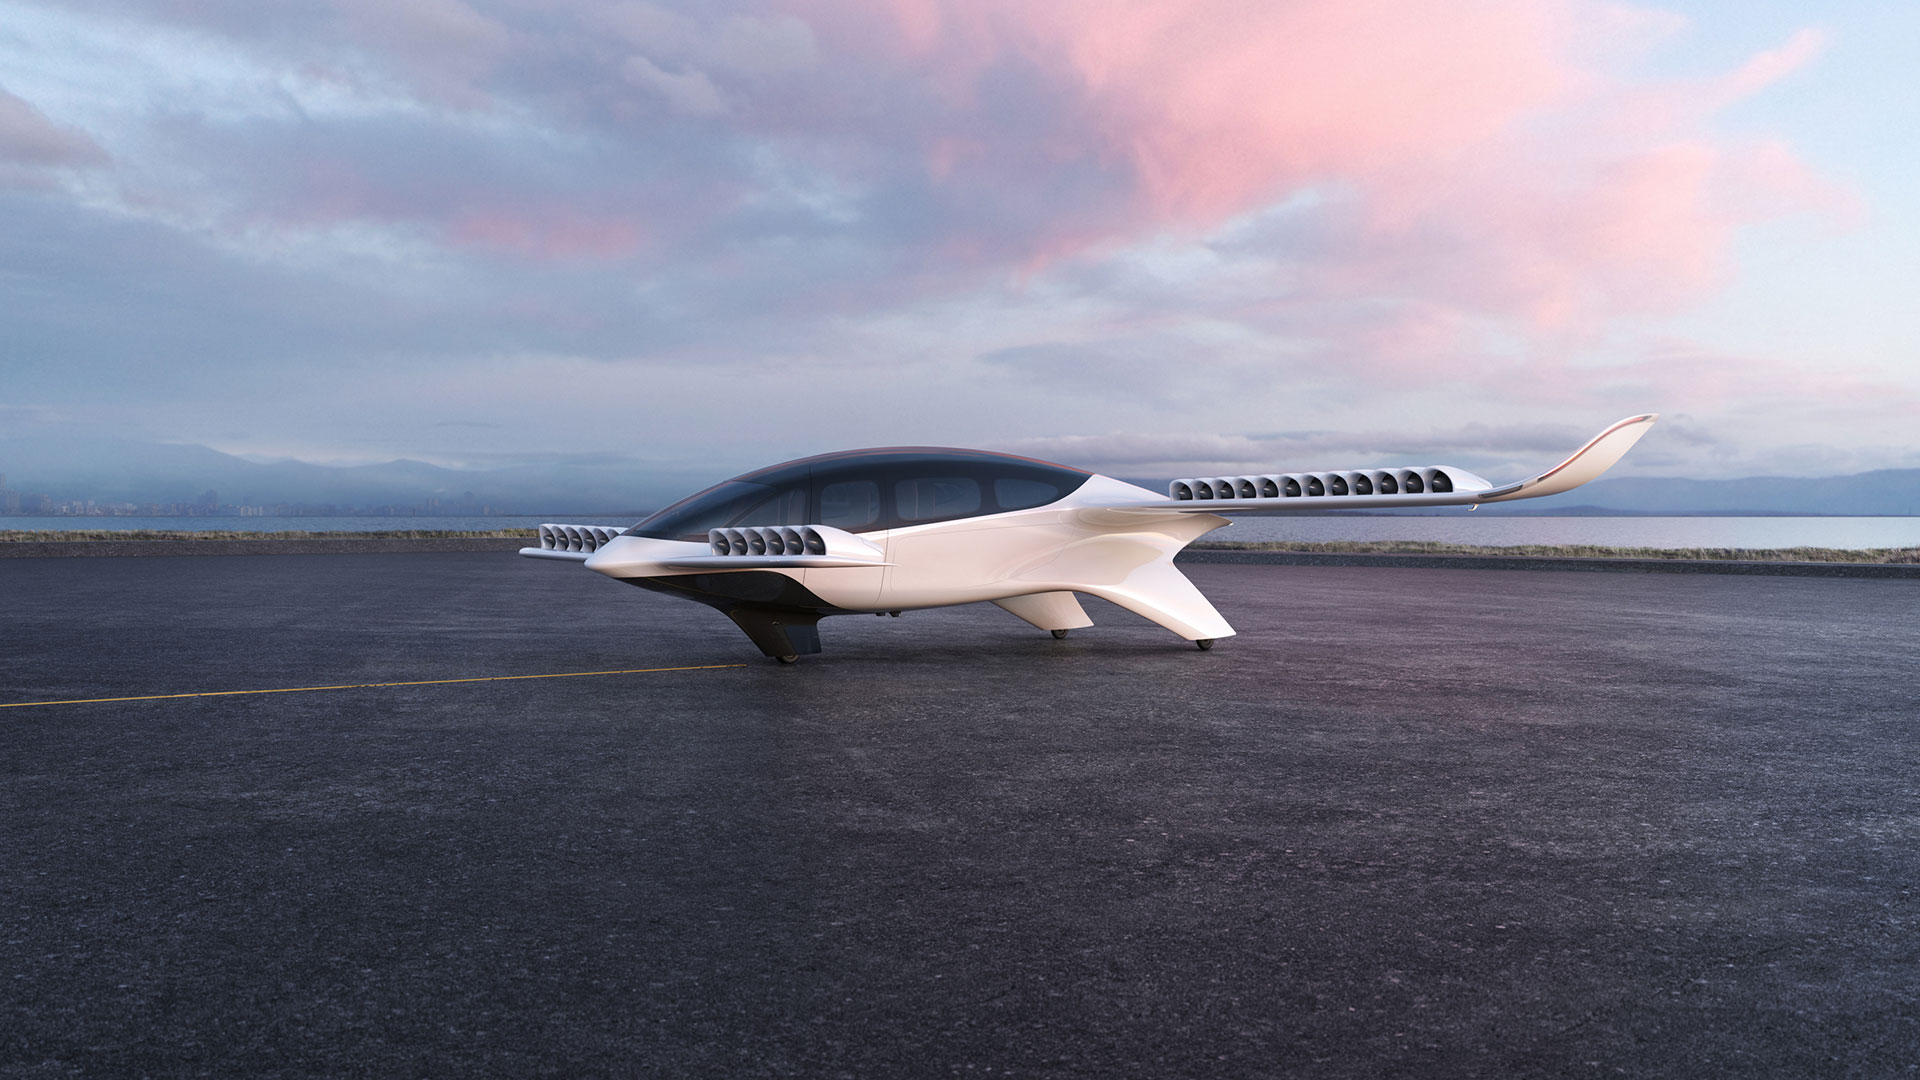  Lillium Updates -  A  7-Seater electric vertical take-off and landing (eVTOL) aircraft  revealed  &  Merger with  'Qell Acquisition Corp' to  Go Public (Nasdaq).